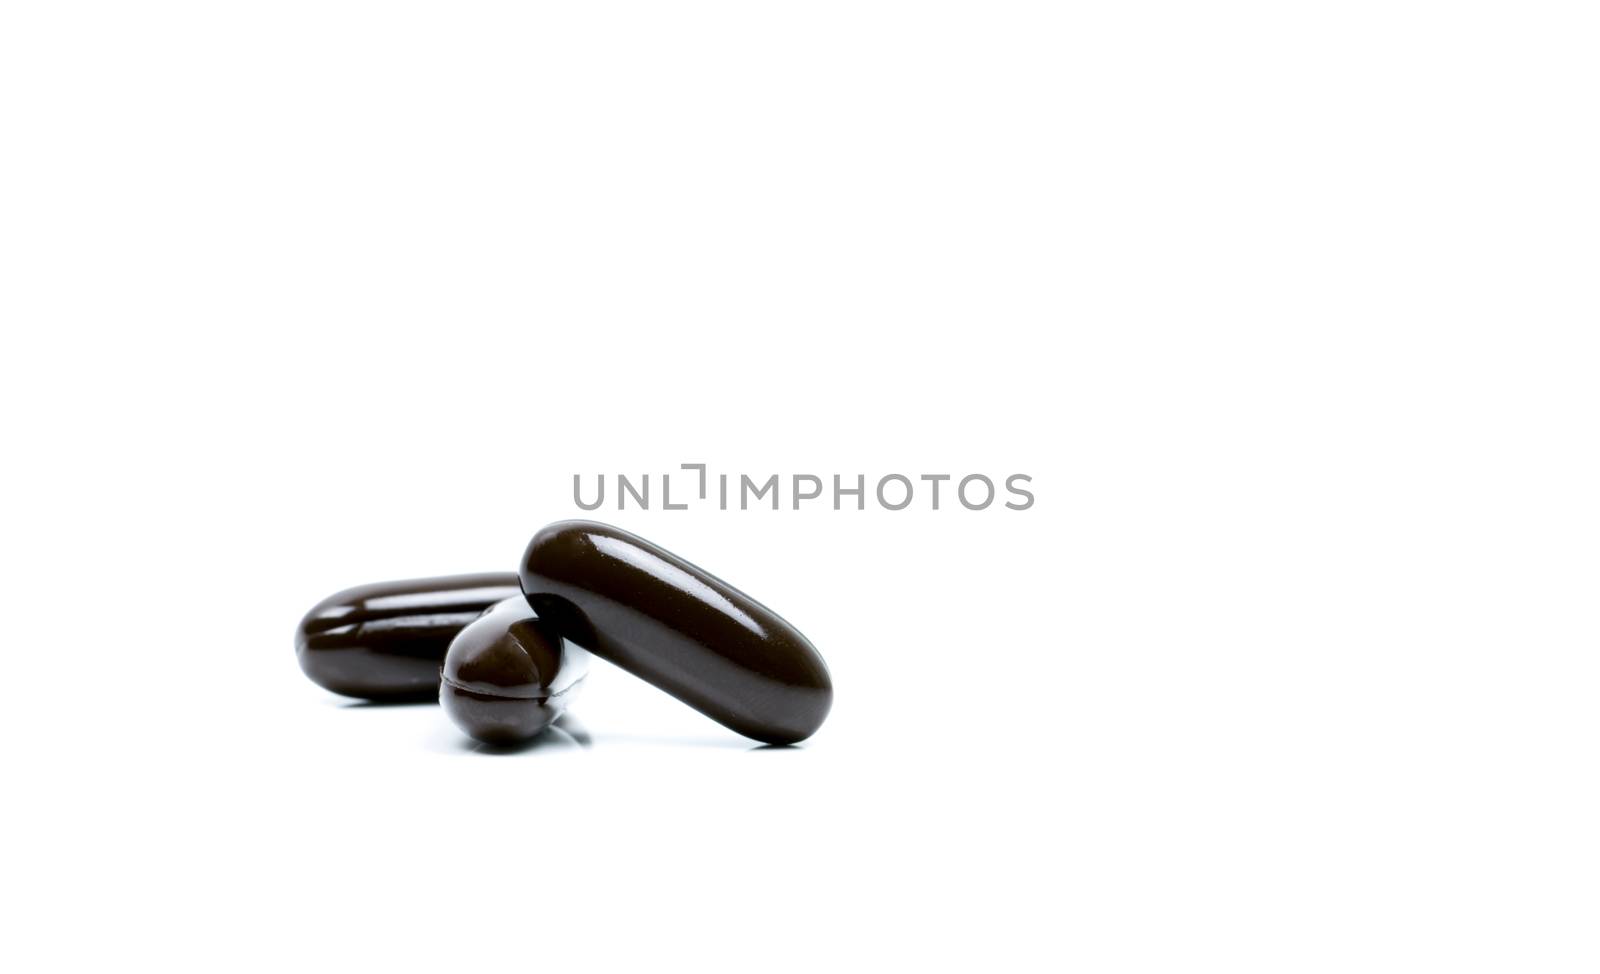 Multivitamins capsule pills for pregnant woman with copy space for text isolated on white background. Vitamins and supplements for hard working guy. Global healthcare concept. Pharmaceutical industry. Pharmacy background. Health budgets and policy. by Fahroni